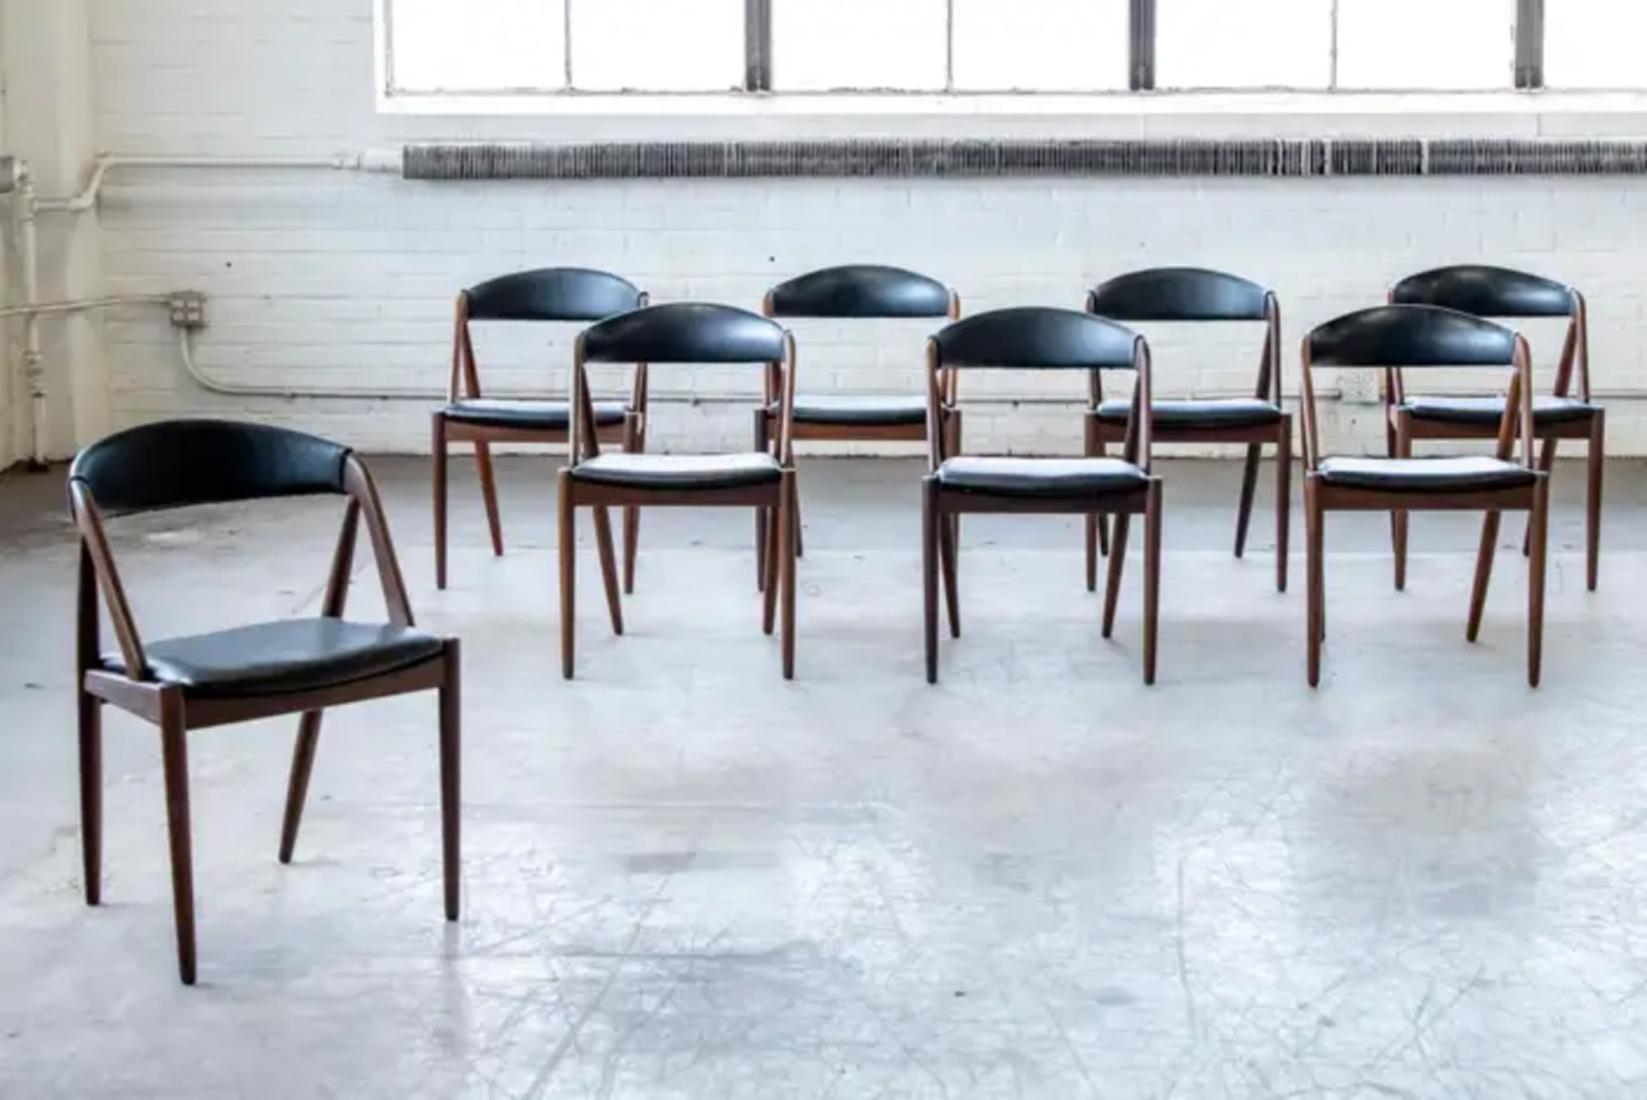 This set of eight dining room chairs was designed by Kai Kristiansen in 1956 and manufactured by Schou Andersen in the 1960s in Denmark. The chairs are made from teak and upholstered in black vinyl. Beautiful frames with very nice color and the